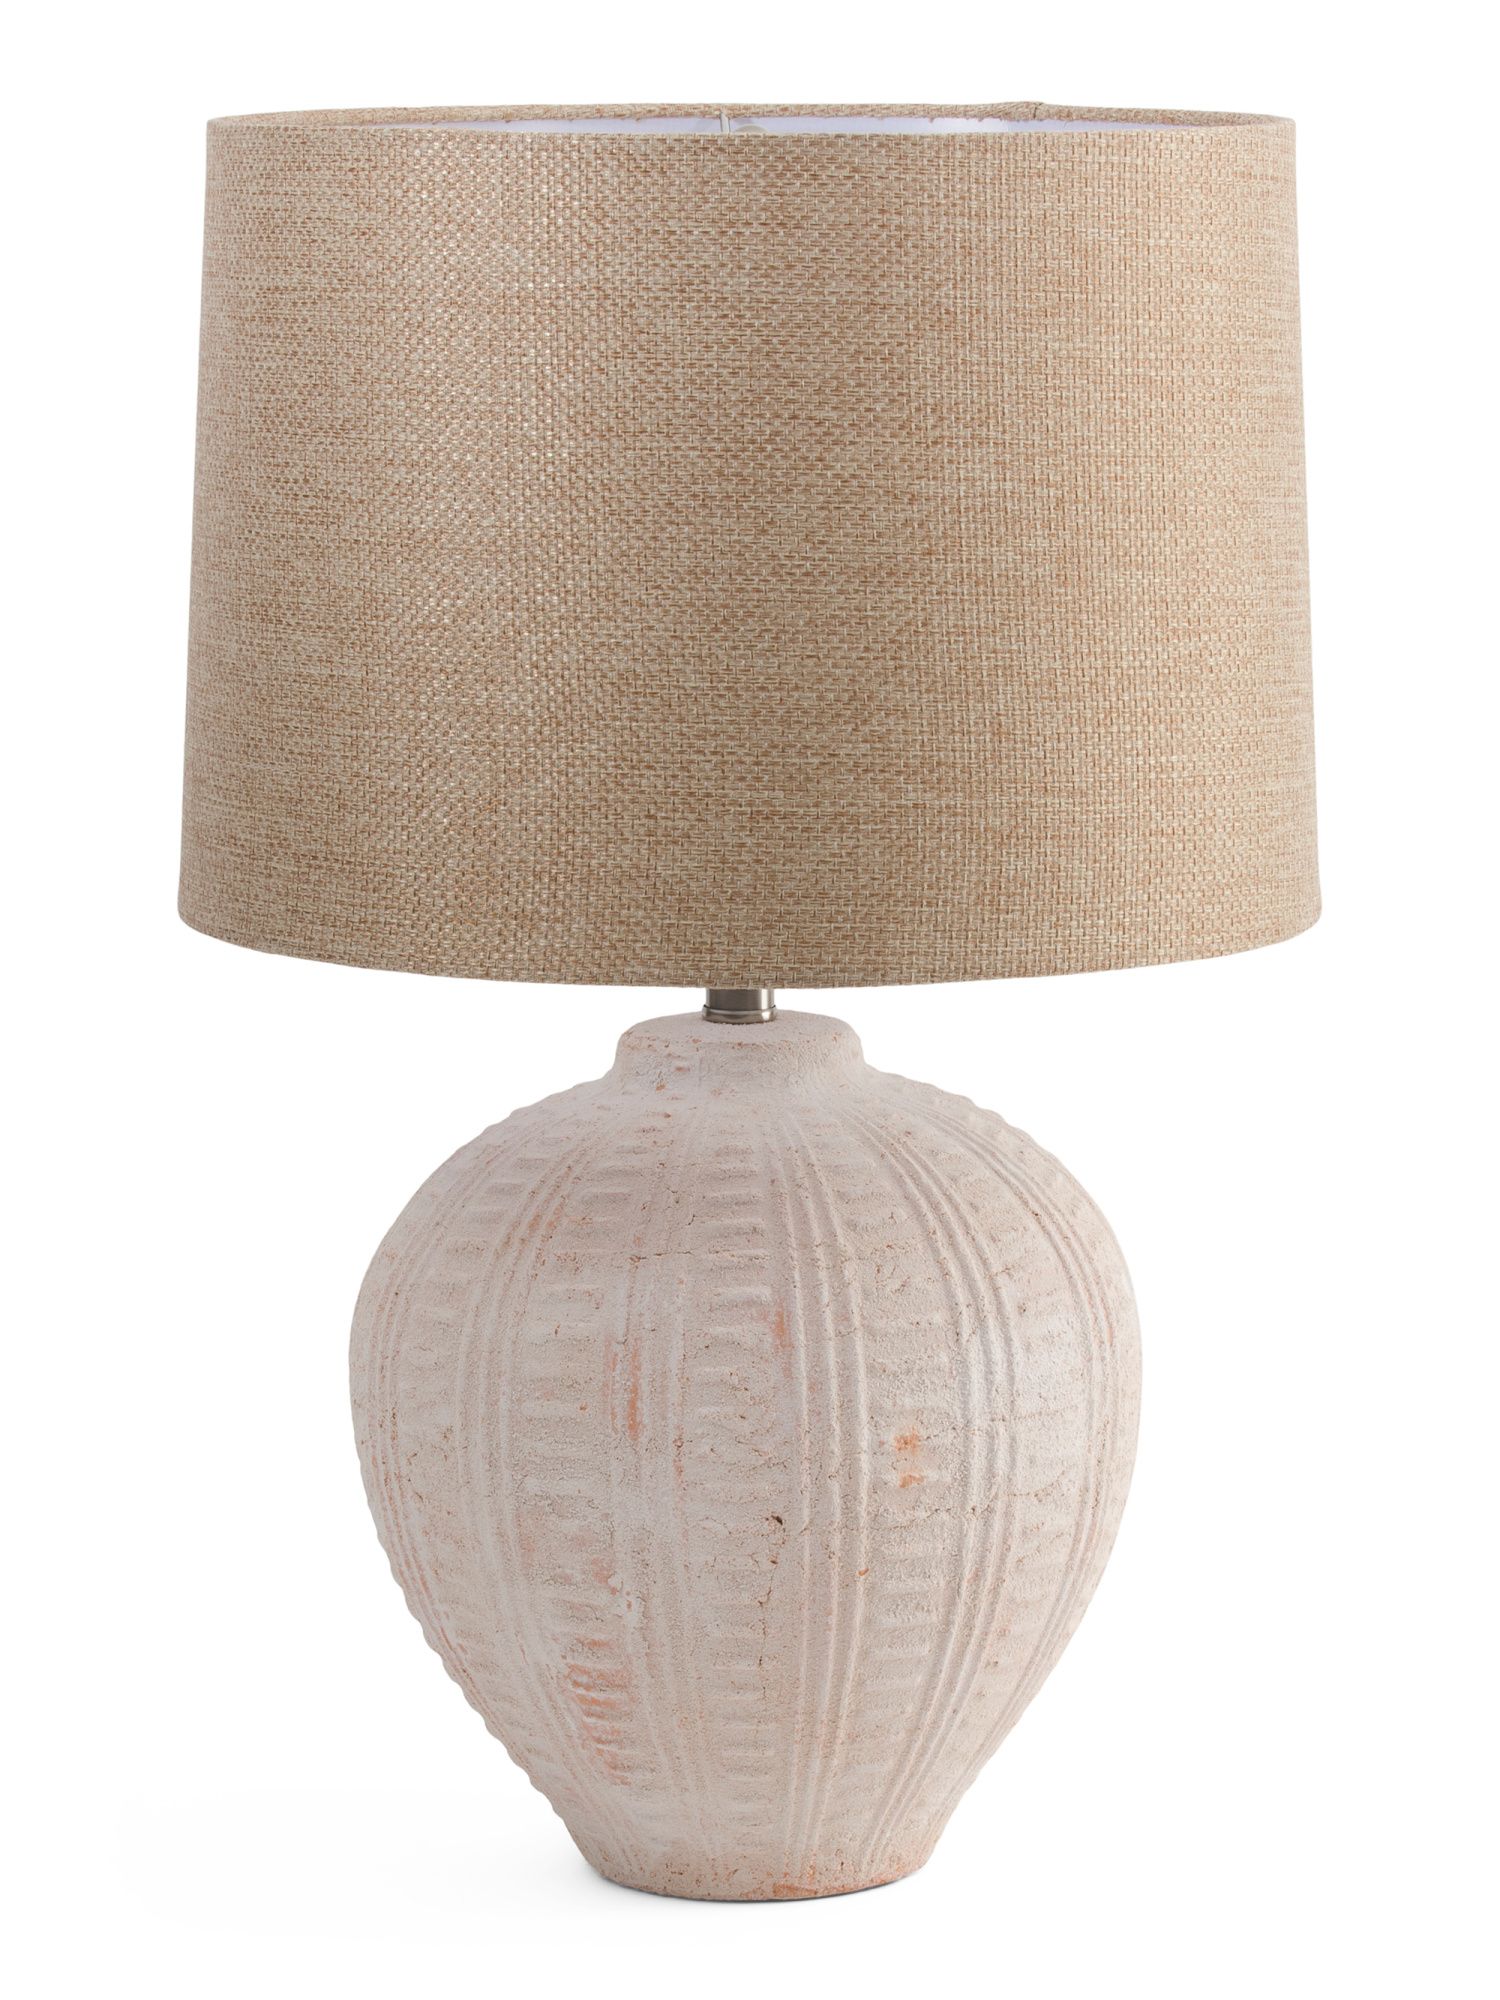 Washed Terracotta Table Lamp | TJ Maxx